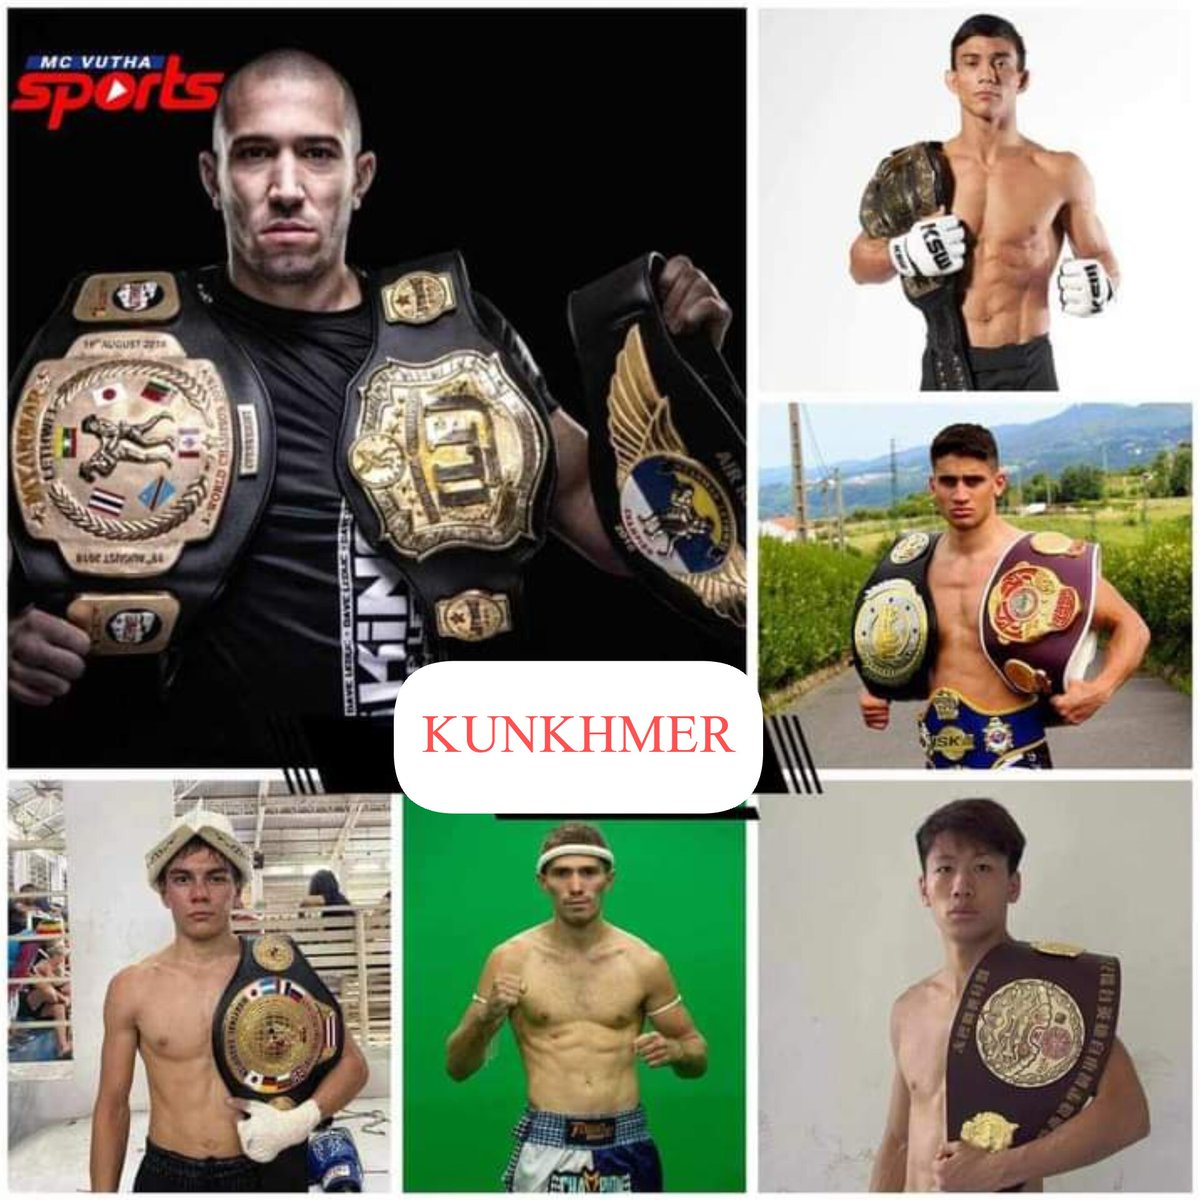 Get ready for this week's fight
#kunkhmerfighter #Cambodia2023 #phnompenh #townsport